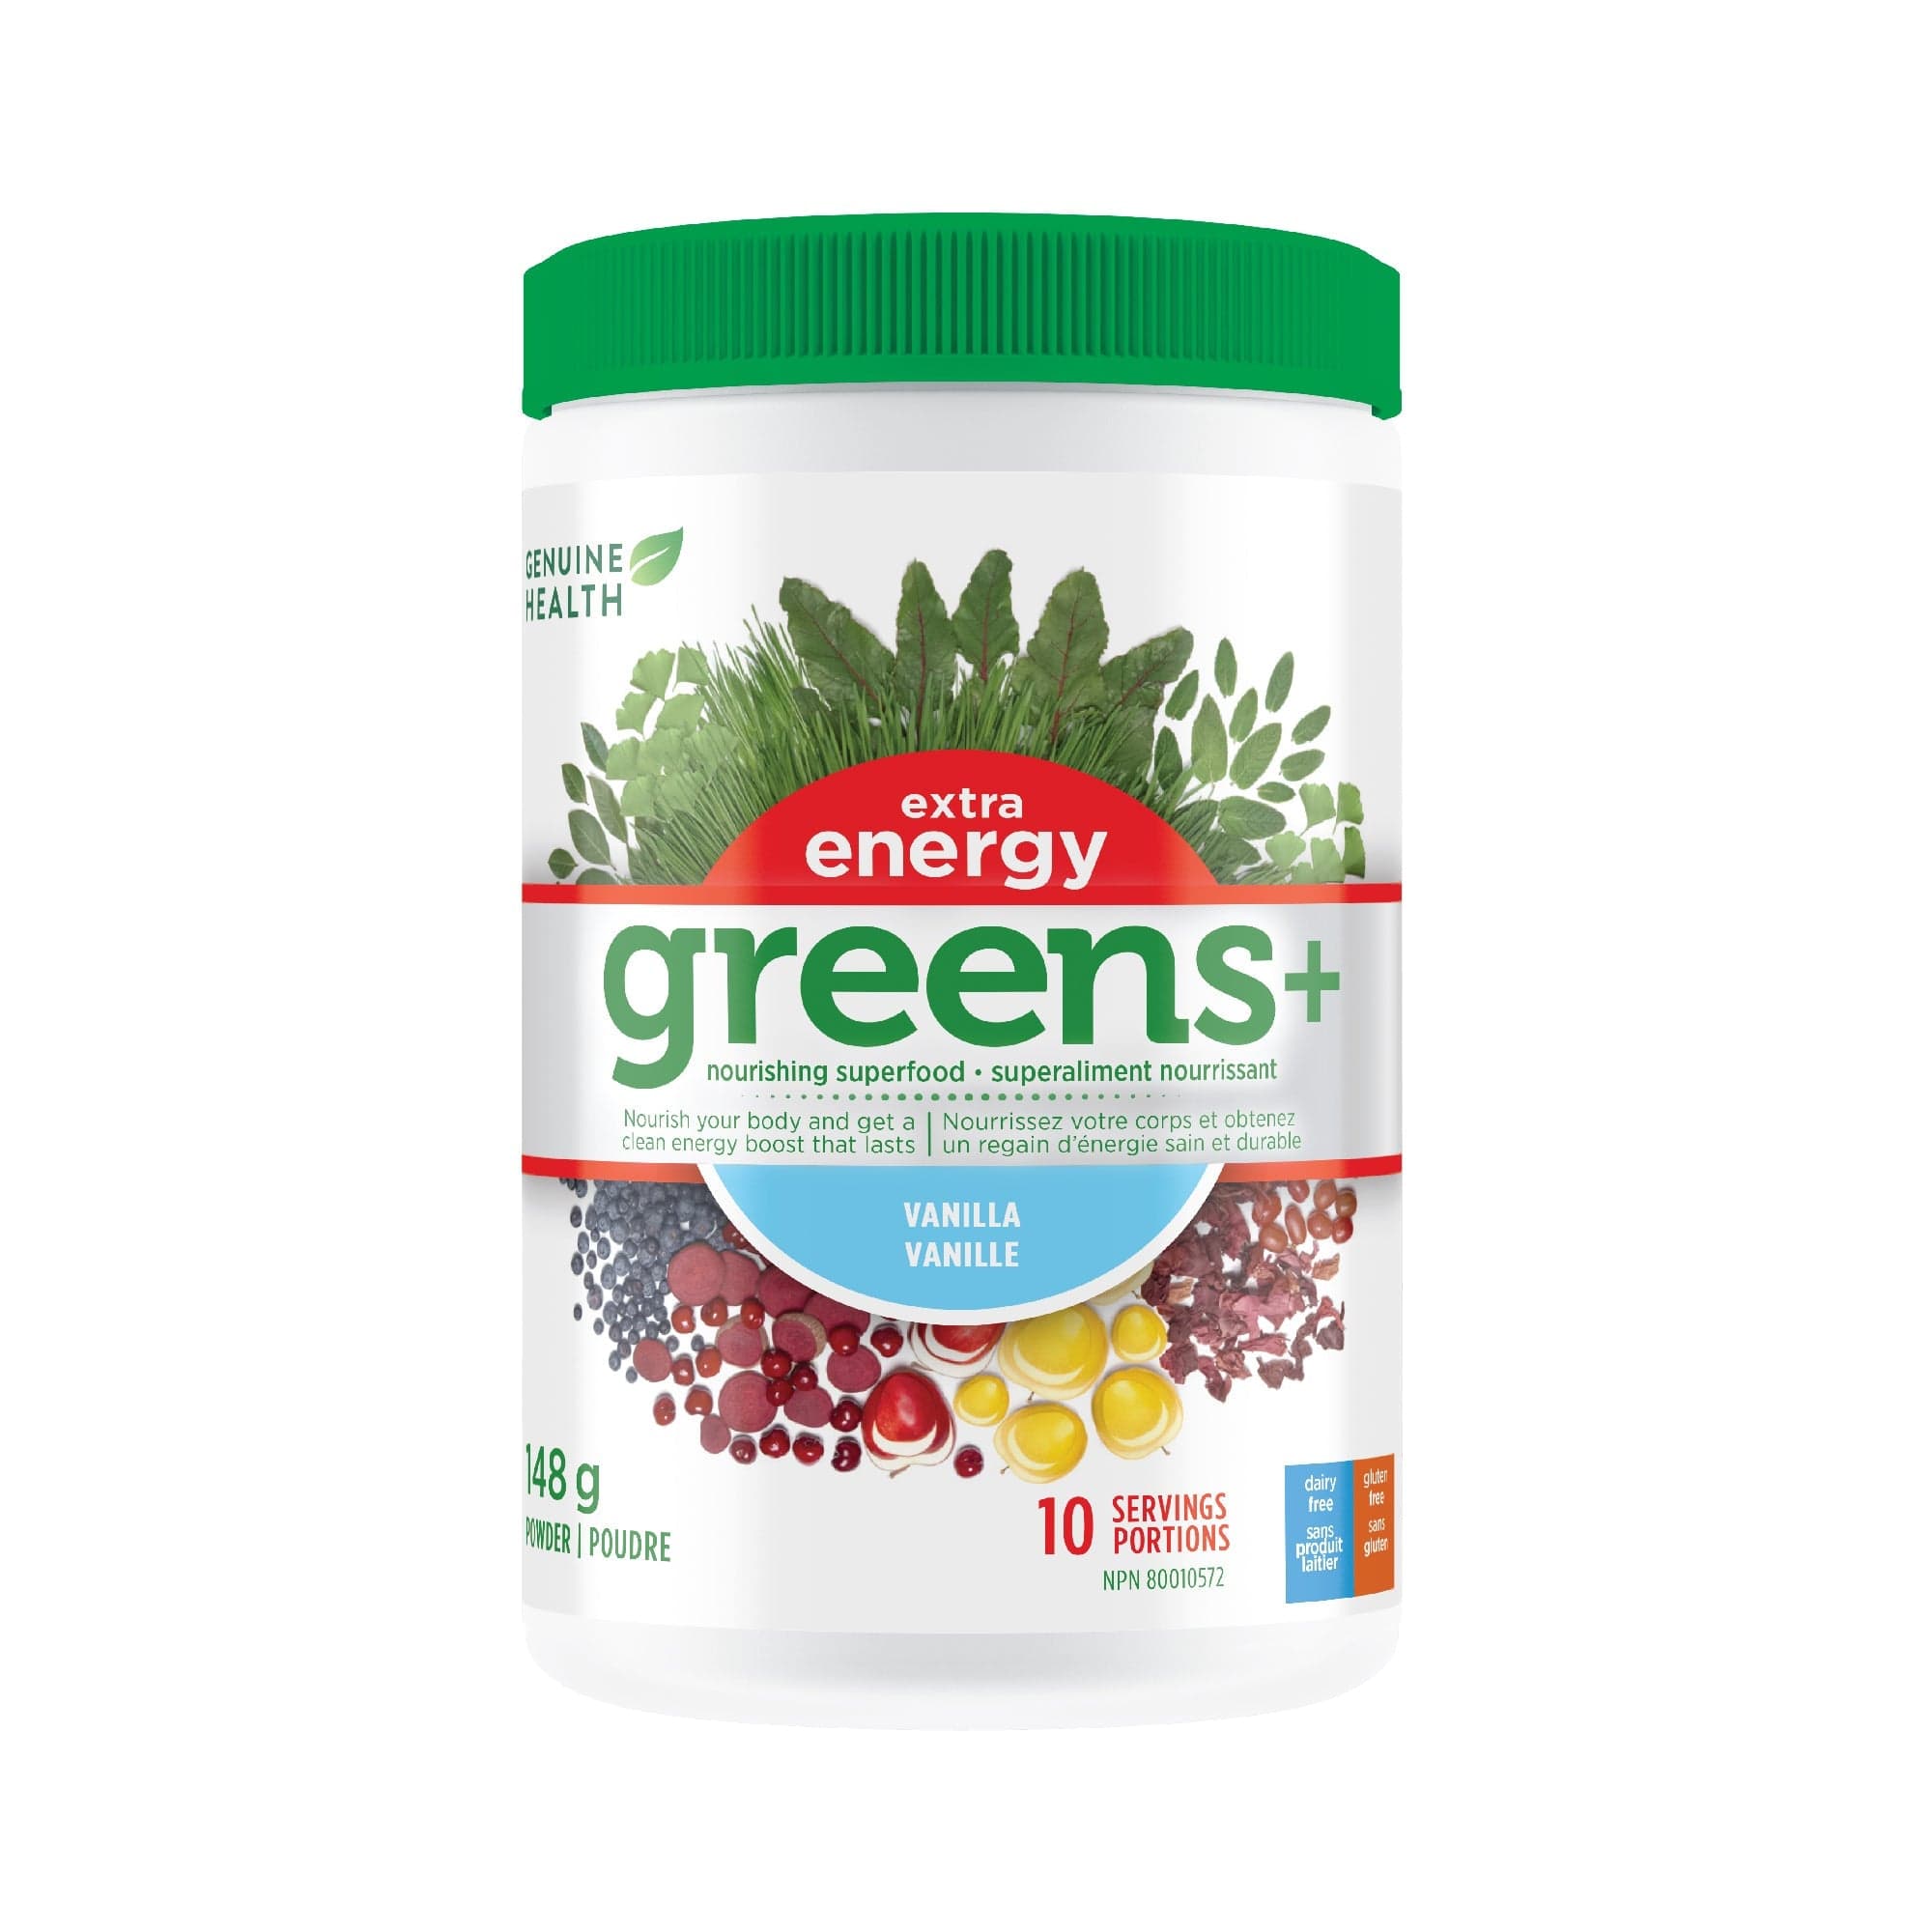 GENUINE HEALTH Suppléments Green + extra energy (vanille) 148g